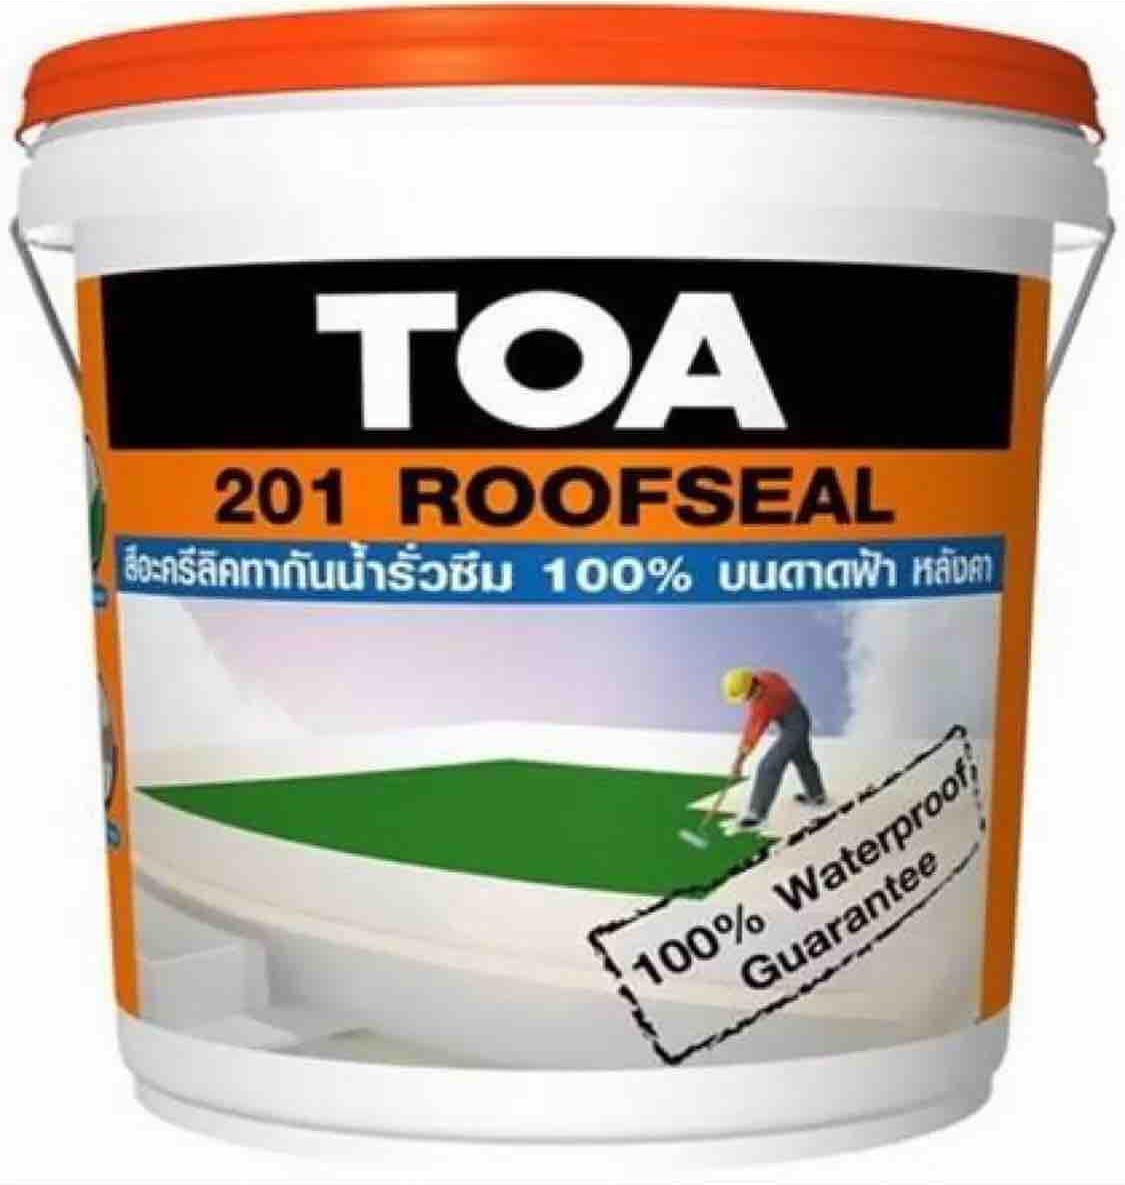 TOA 201 Roofseal -(20Kgs) สีเทาTOA